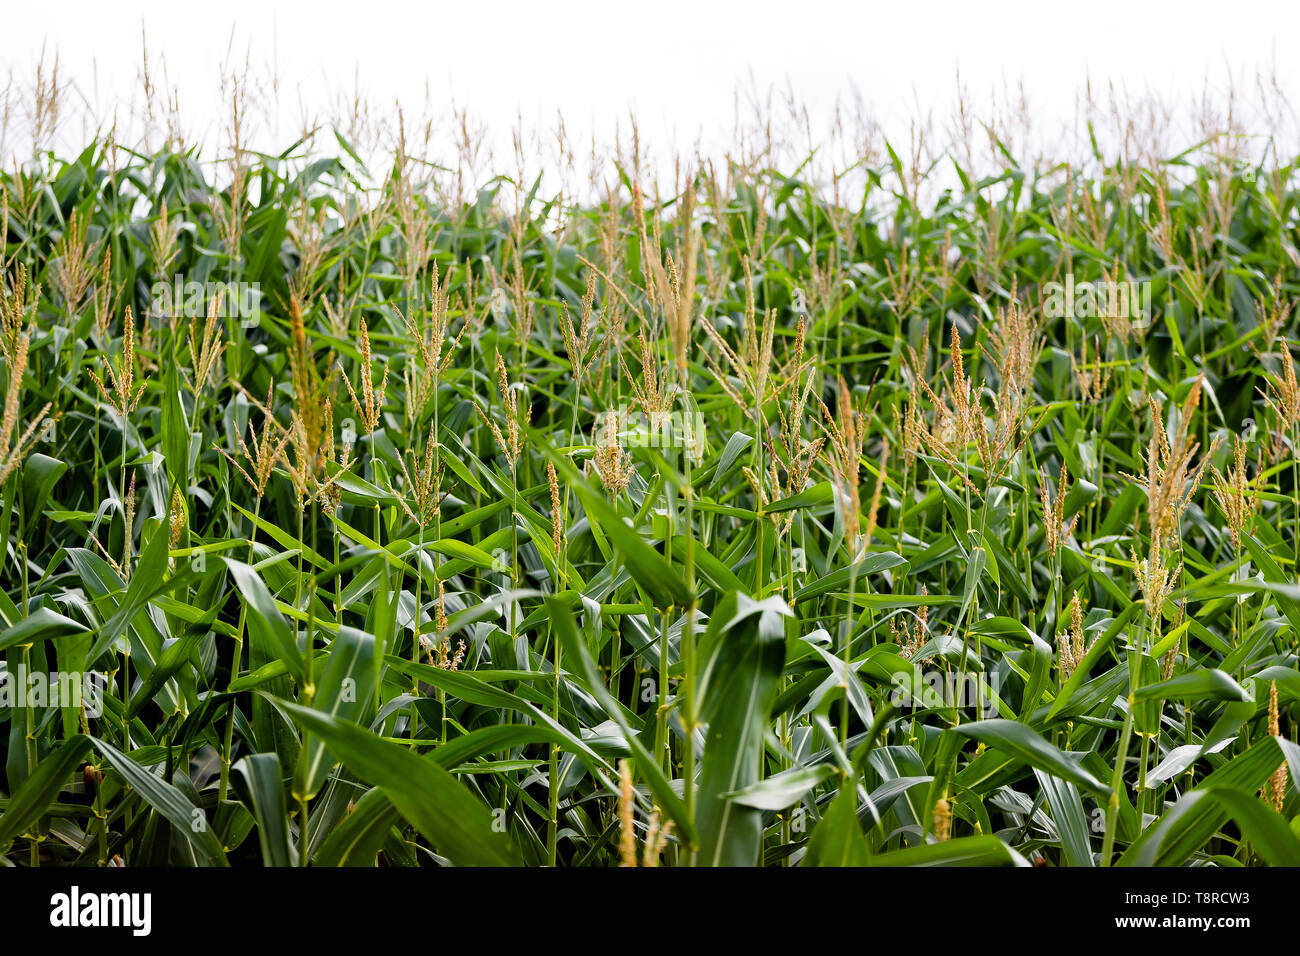 Full grown maize plants seen in a corn field. Agriculture in Brazil is one of the main bases of the country's economy. Agriculture is an activity that is part of the primary sector where the land is cultivated and harvested for subsistence, export or trade. Stock Photo